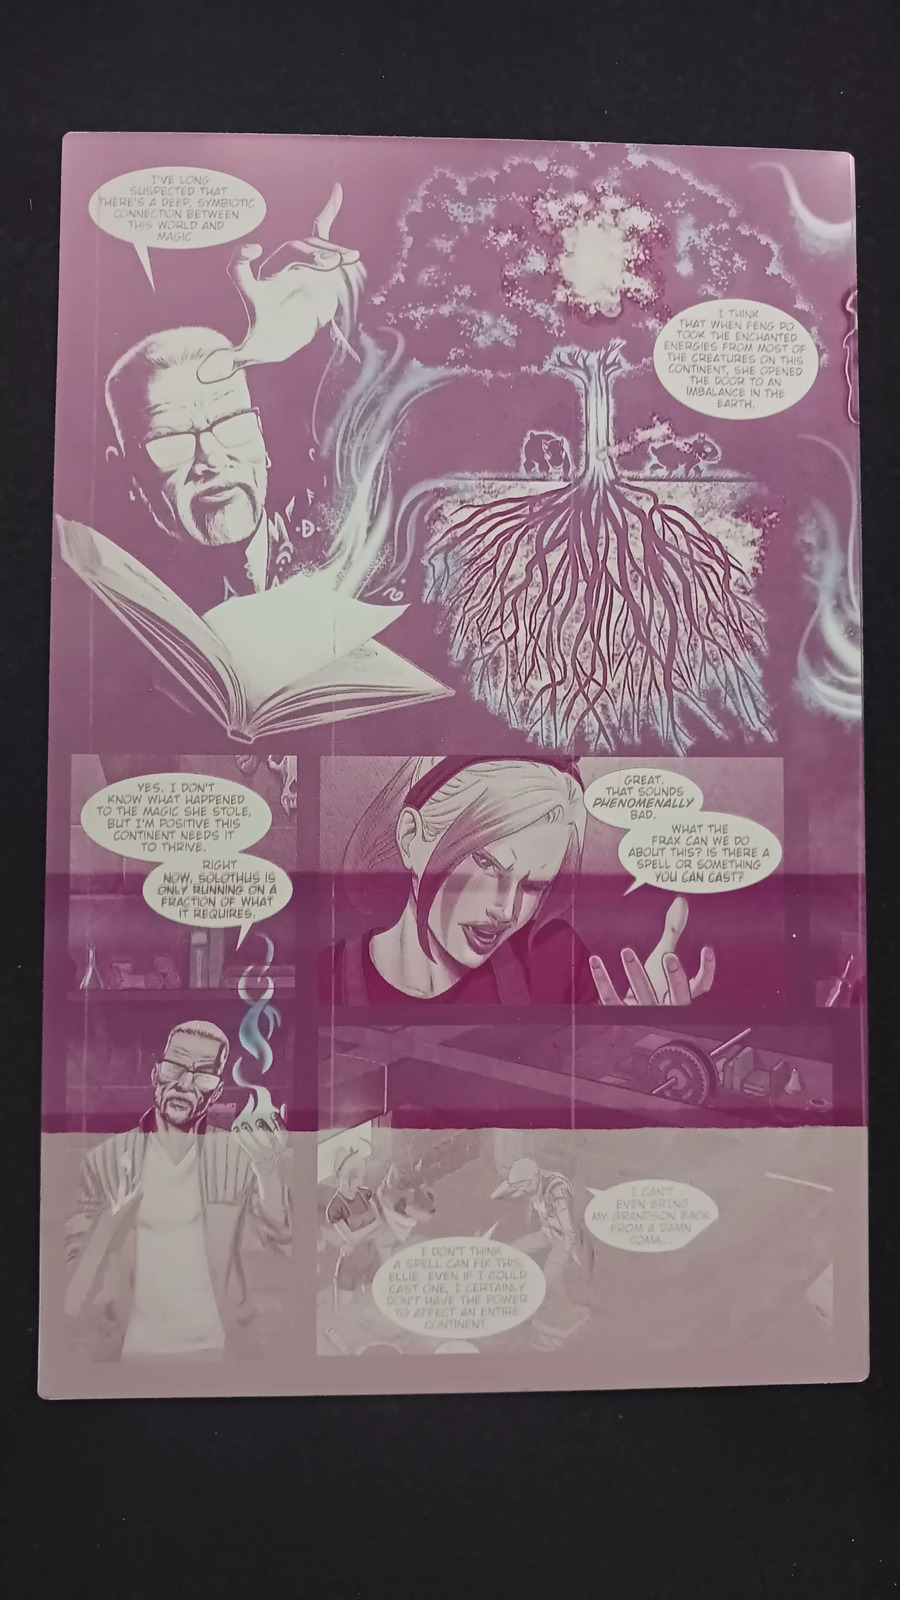 By The Horns Dark Earth #1 - Page 12 - PRESSWORKS - Comic Art - Printer Plate -